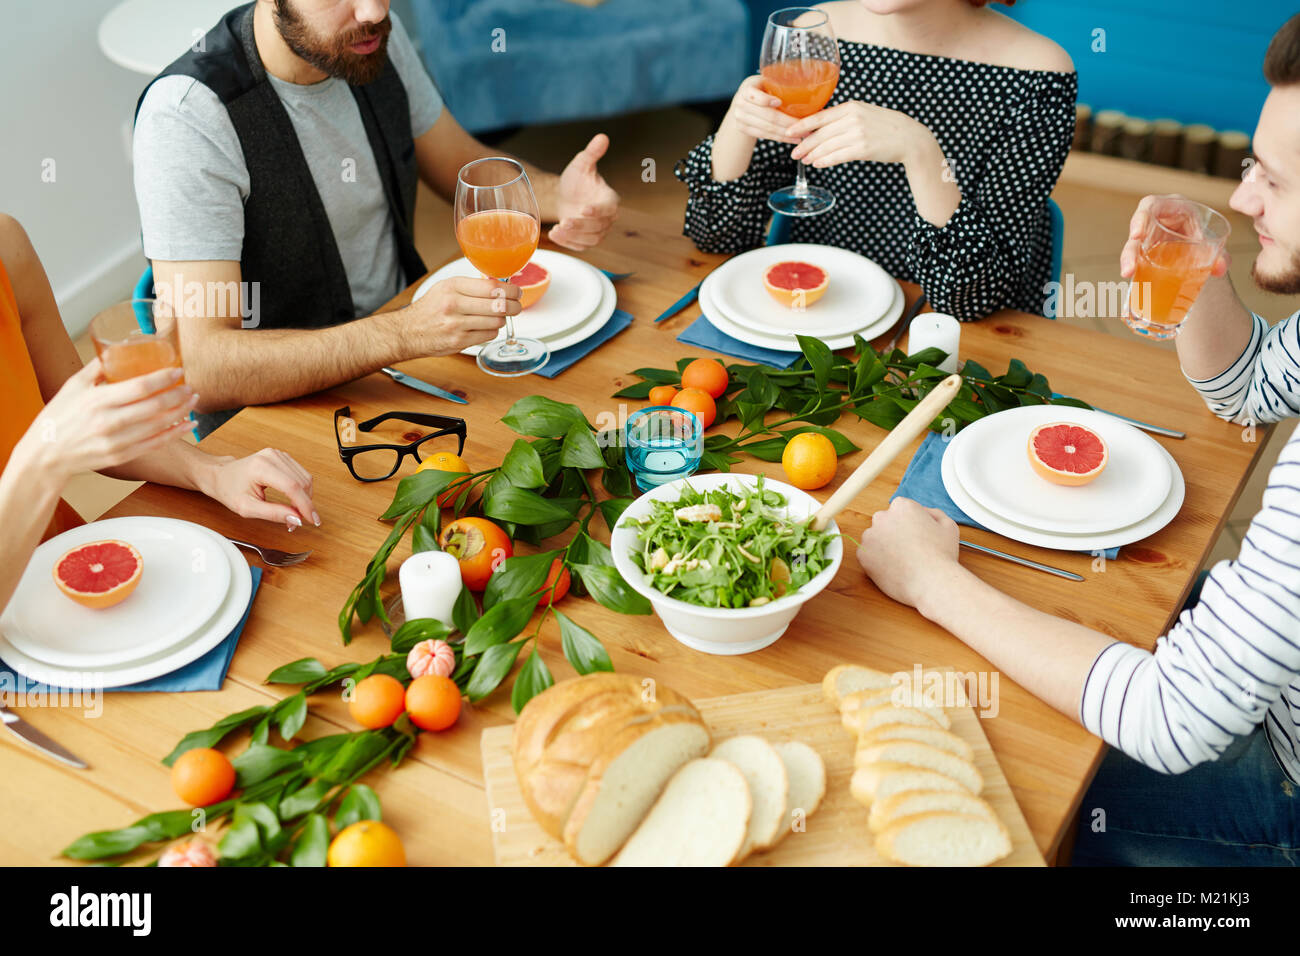 Friends by table Stock Photo - Alamy